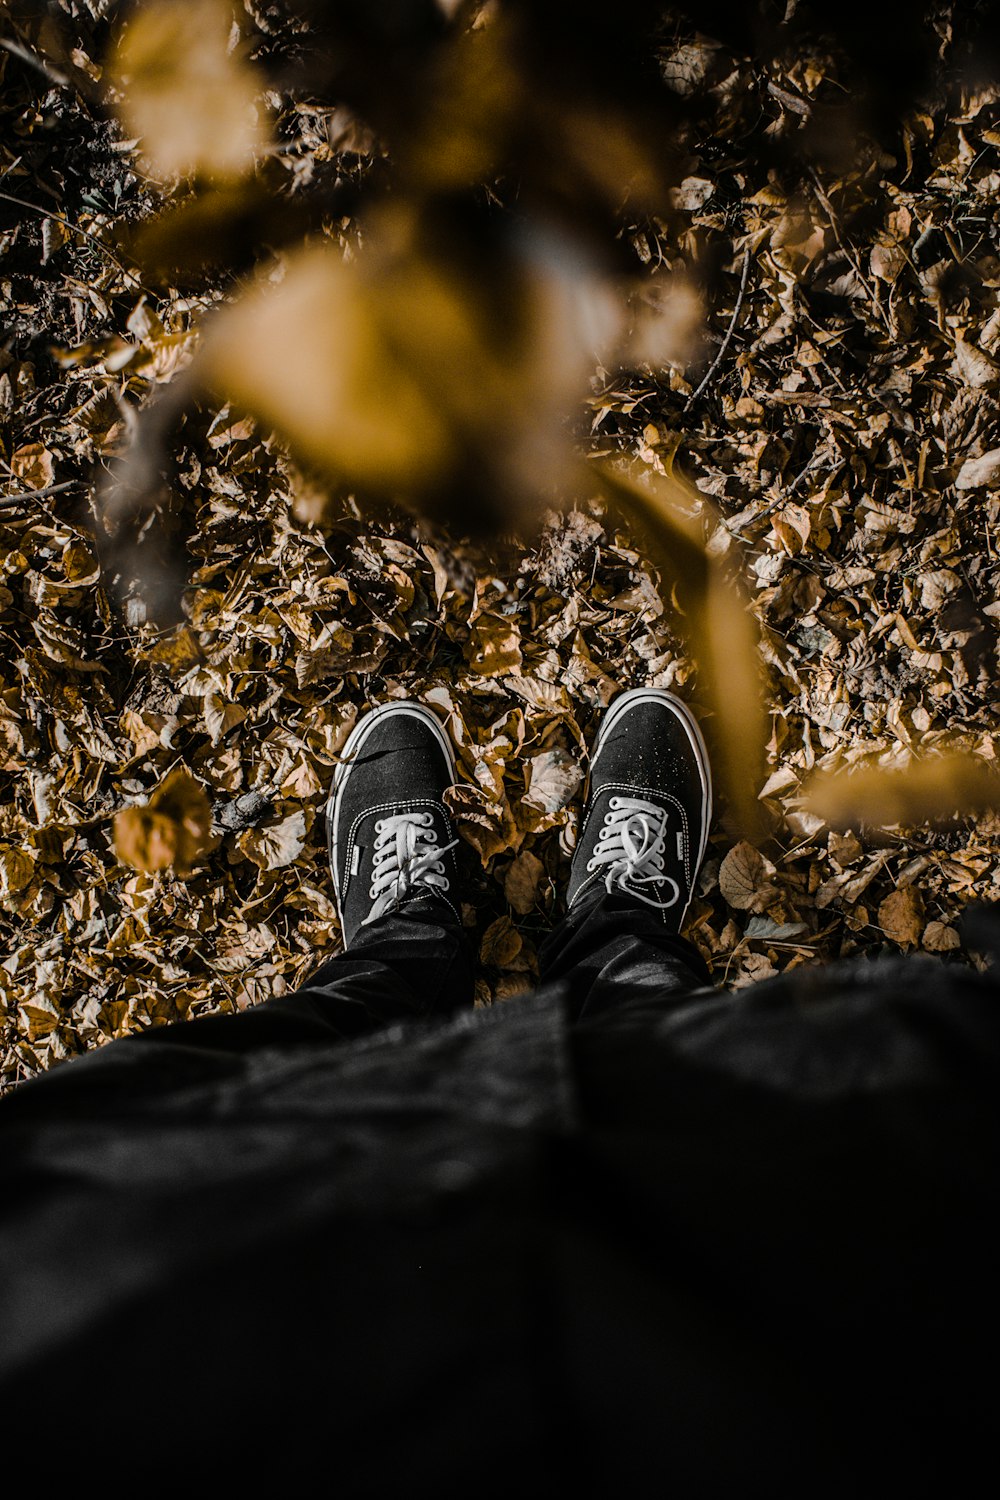 person in black pants and black and white sneakers standing on dried leaves